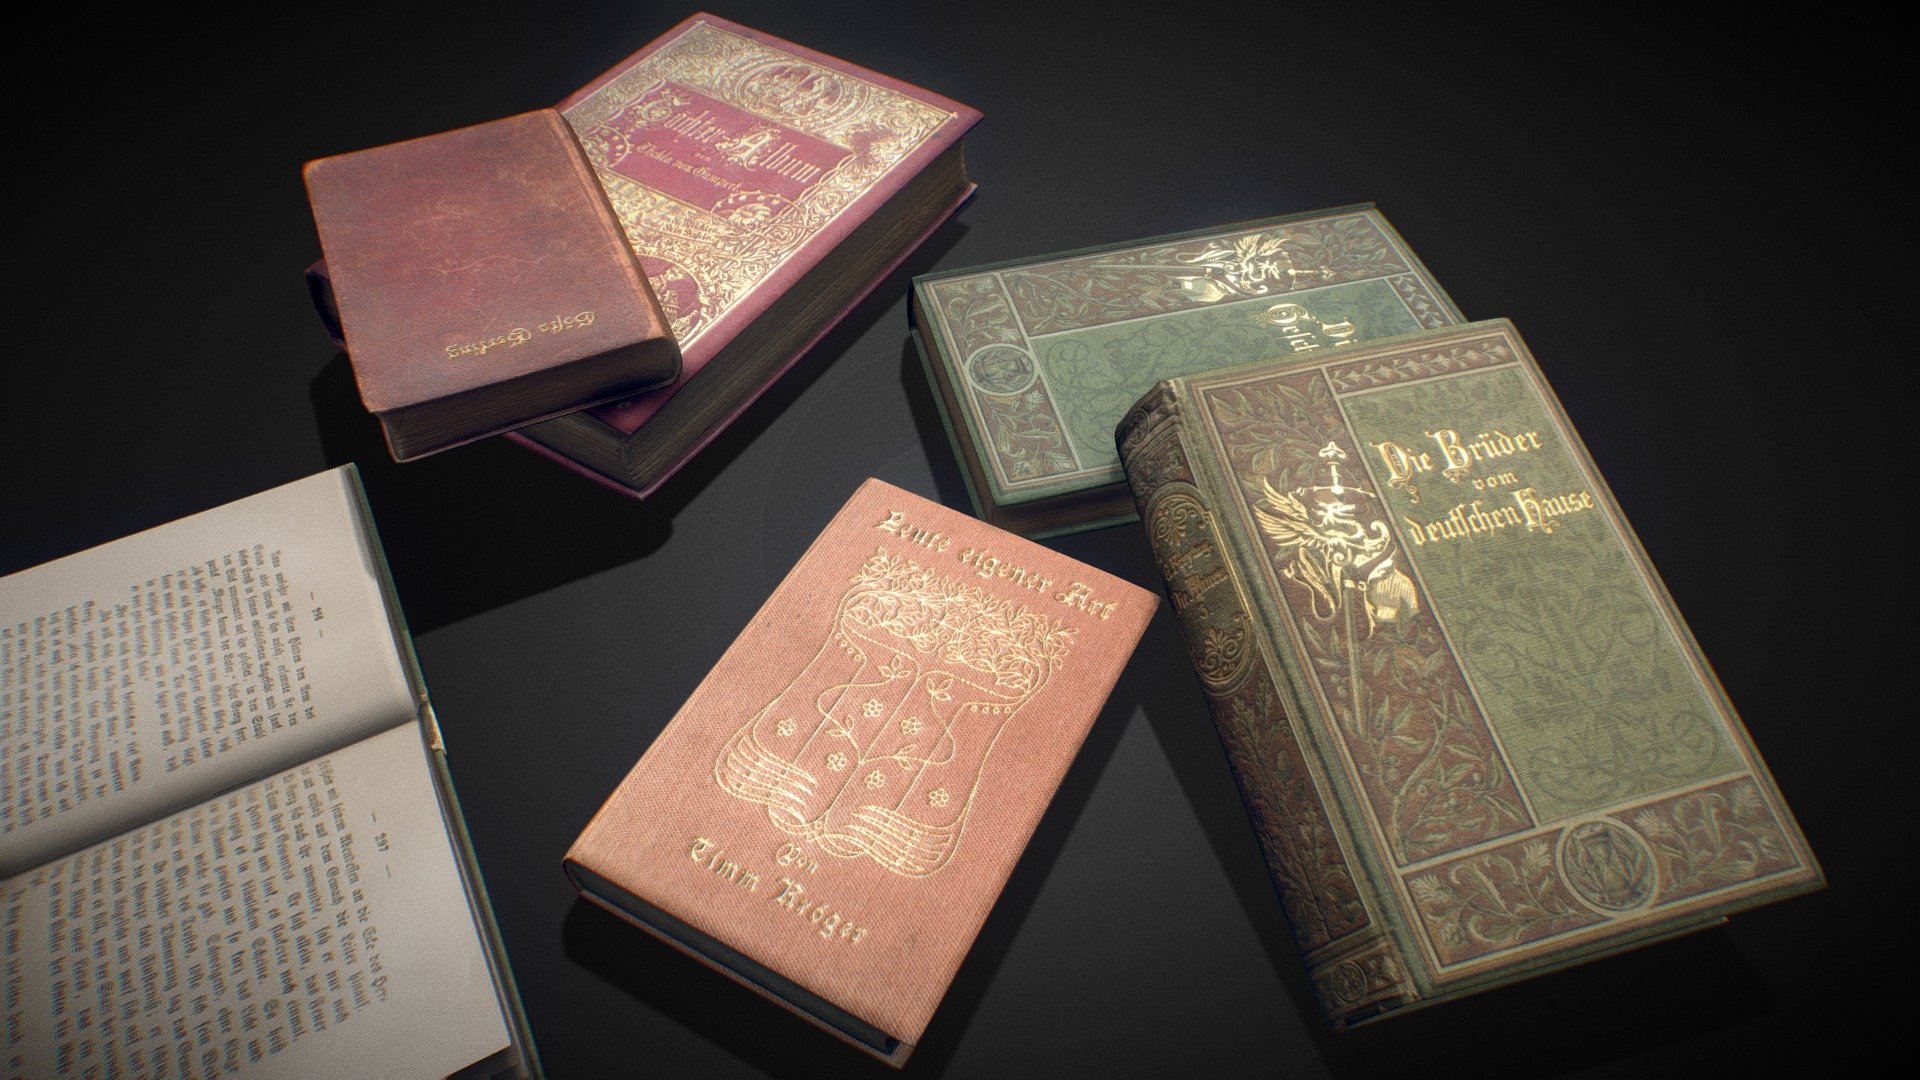 these books have been professionally modeled after real life reference and therefore have a great amount of detail and realism. each book has its own PBR material with a diffuse, metallic, roughness, and normal texture.

4K/8K Textures (read below for additional info
PBR Materials (diffuse, metallic, roughness, normal)
subdivision ready geometry (low poly)

poly counts and texture info: book 1: 496 faces, 552 verts | 4K Textures book 2: 496 faces, 552 verts | 4K Textures book 3: 608 faces, 676 verts | 4K Textures book 4: 504 faces, 558 verts | 4K Textures book 5: 504 faces, 558 verts | 4K Textures book 6: 1111 faces, 1197 verts | 8K Textures (listed from left to right according to the turntable/wireframe renders) overall poly count: 3719 faces, 4093 verts - Ancient Books - Buy Royalty Free 3D model by arloc 3d model